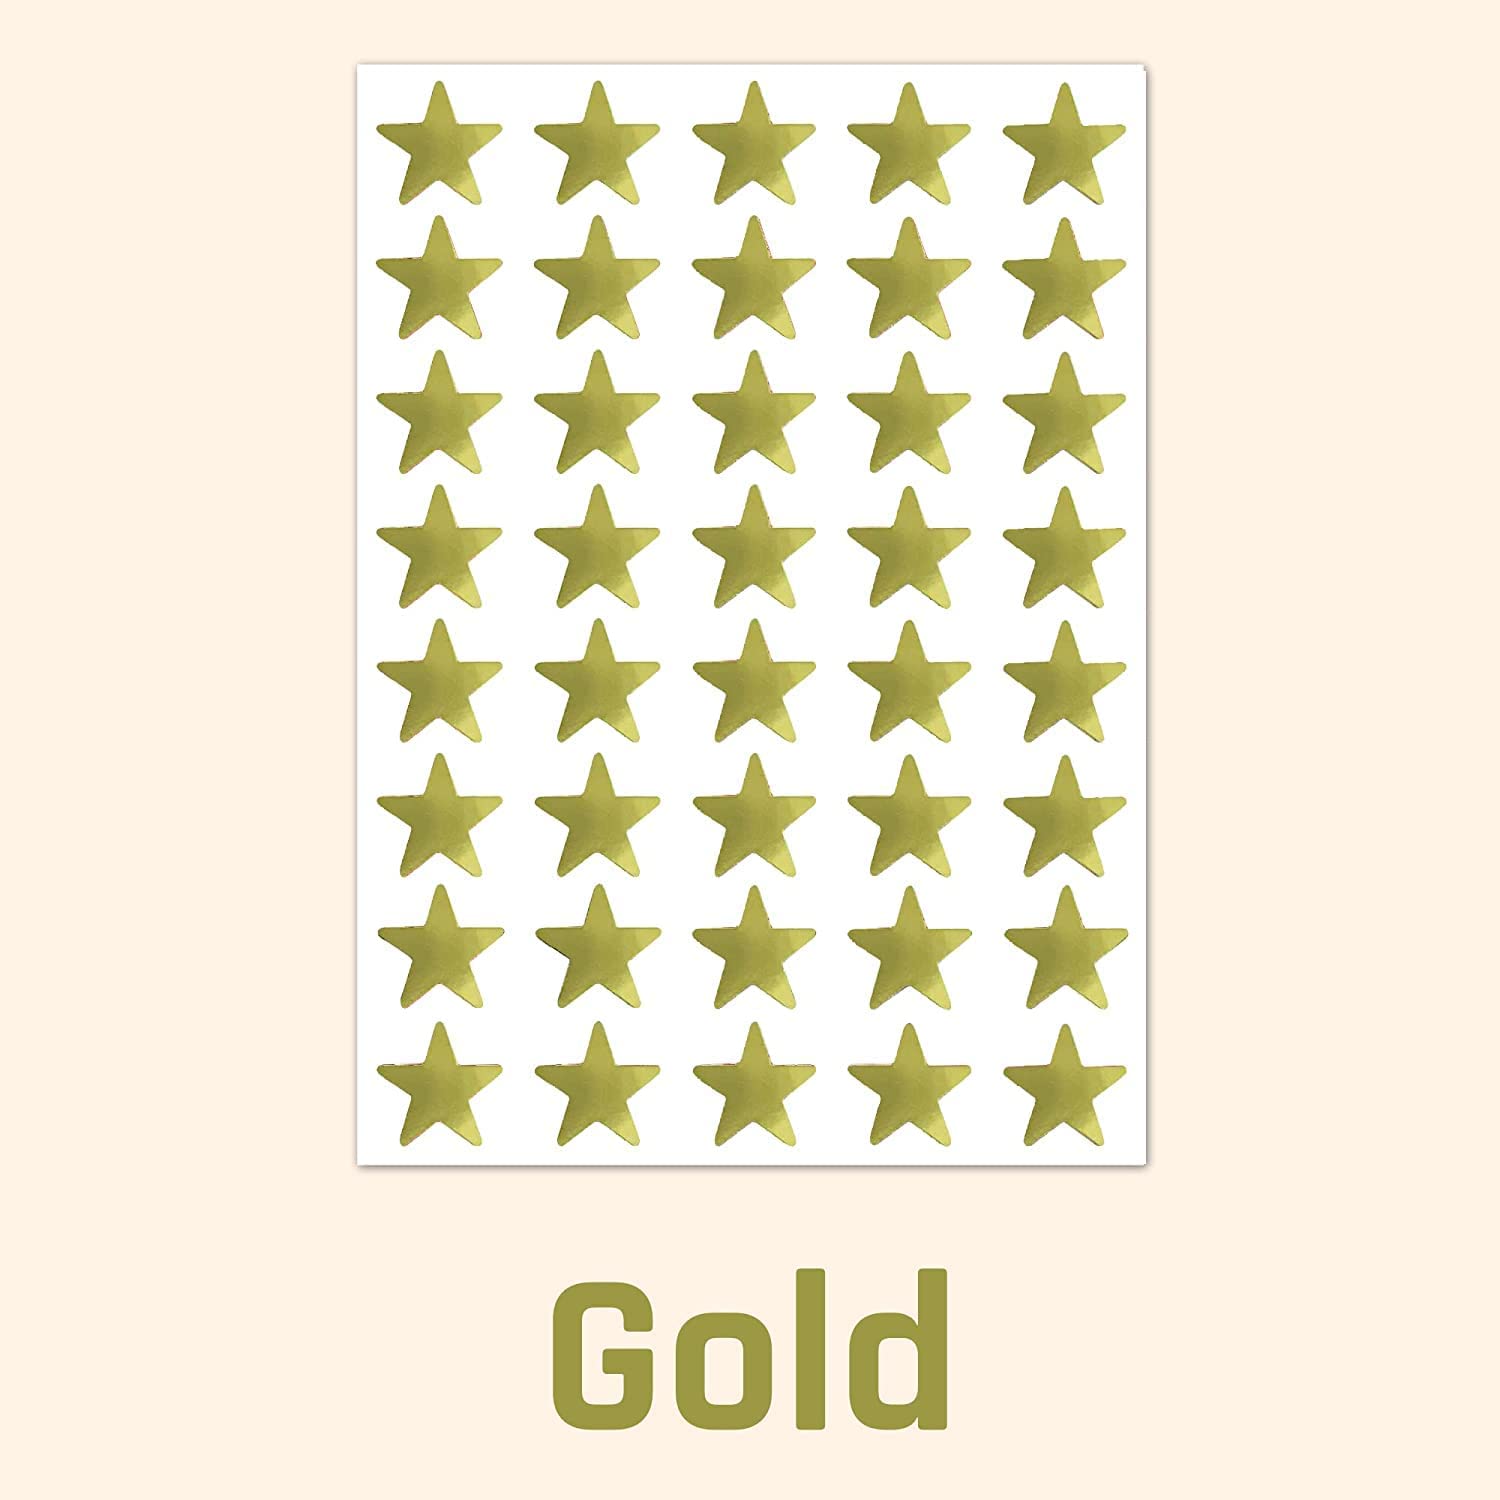 A set of adhesive stickers with a gold foil star design, 1000 pieces